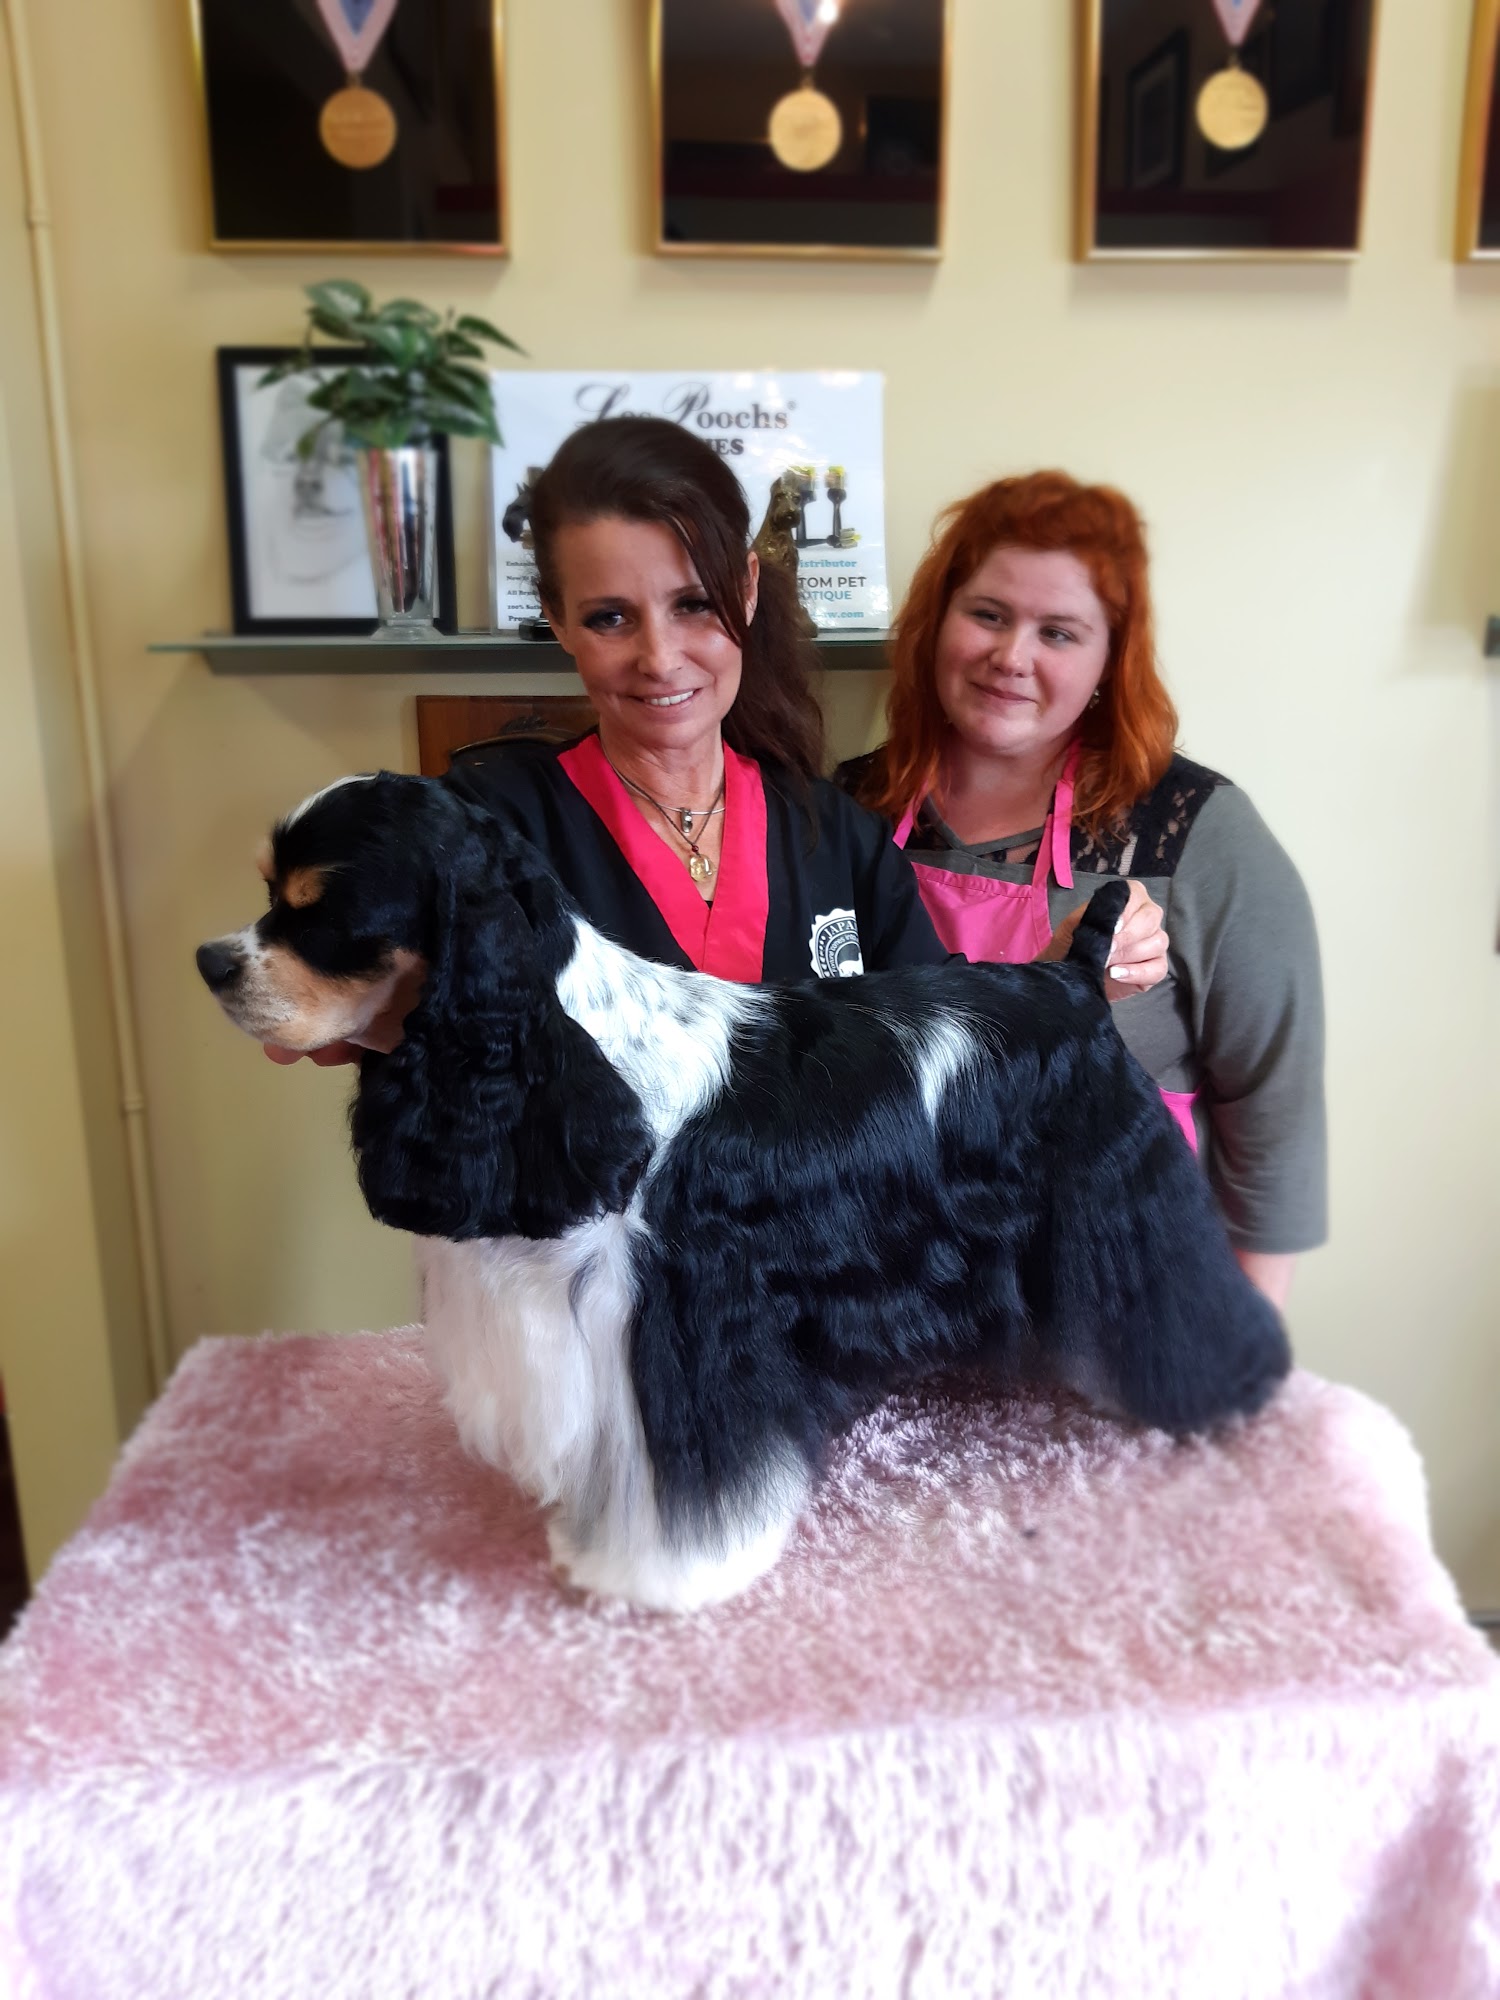 Wags to Whiskers and Global Groomers TV 243100 Rainbow Rd, Chestermere Alberta T1X 0M7